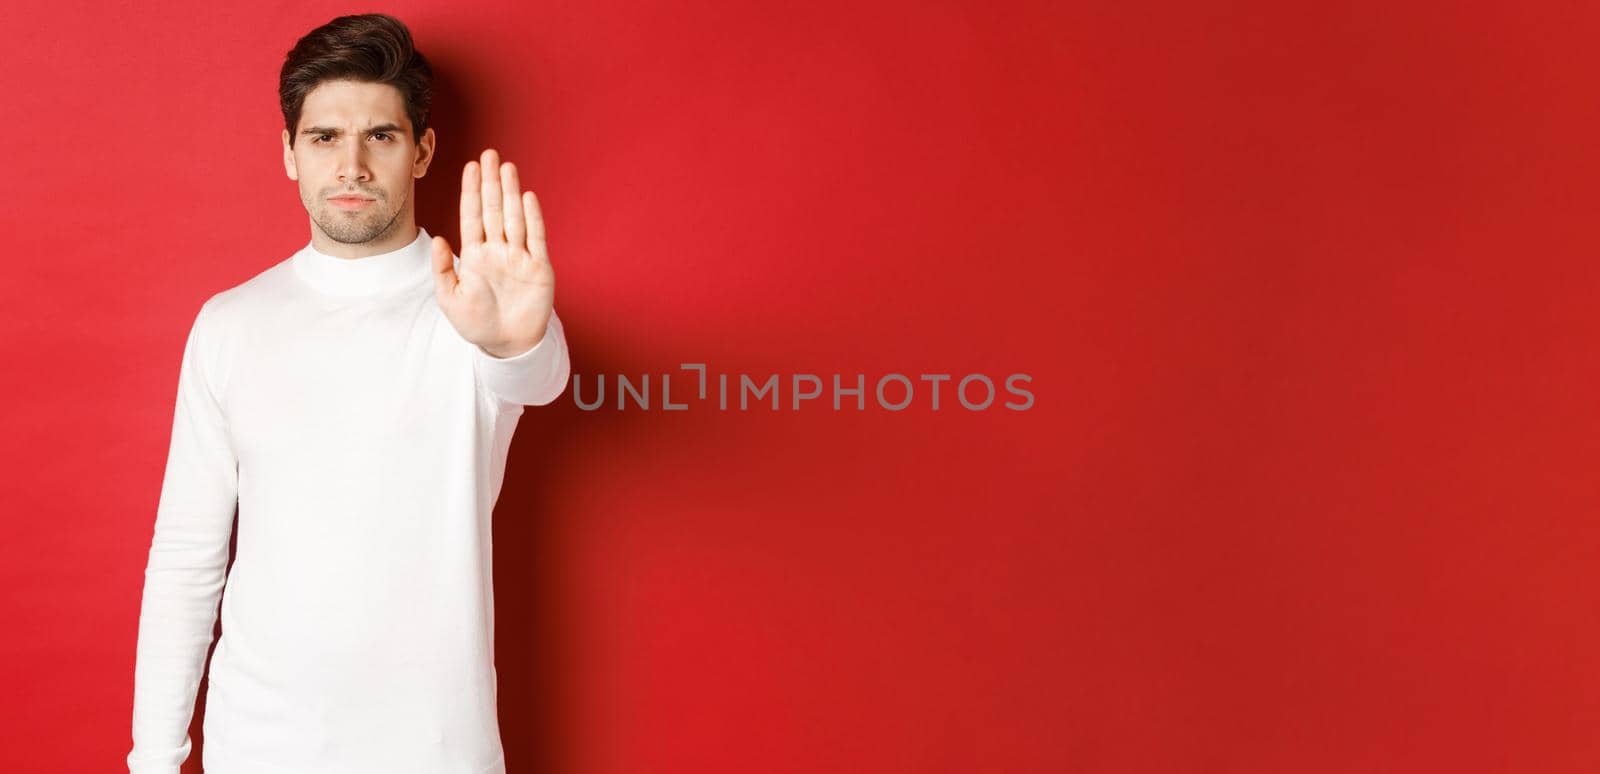 Image of serious and confident man telling to stop, forbid something, extending one hand and prohibit action, standing over red background.